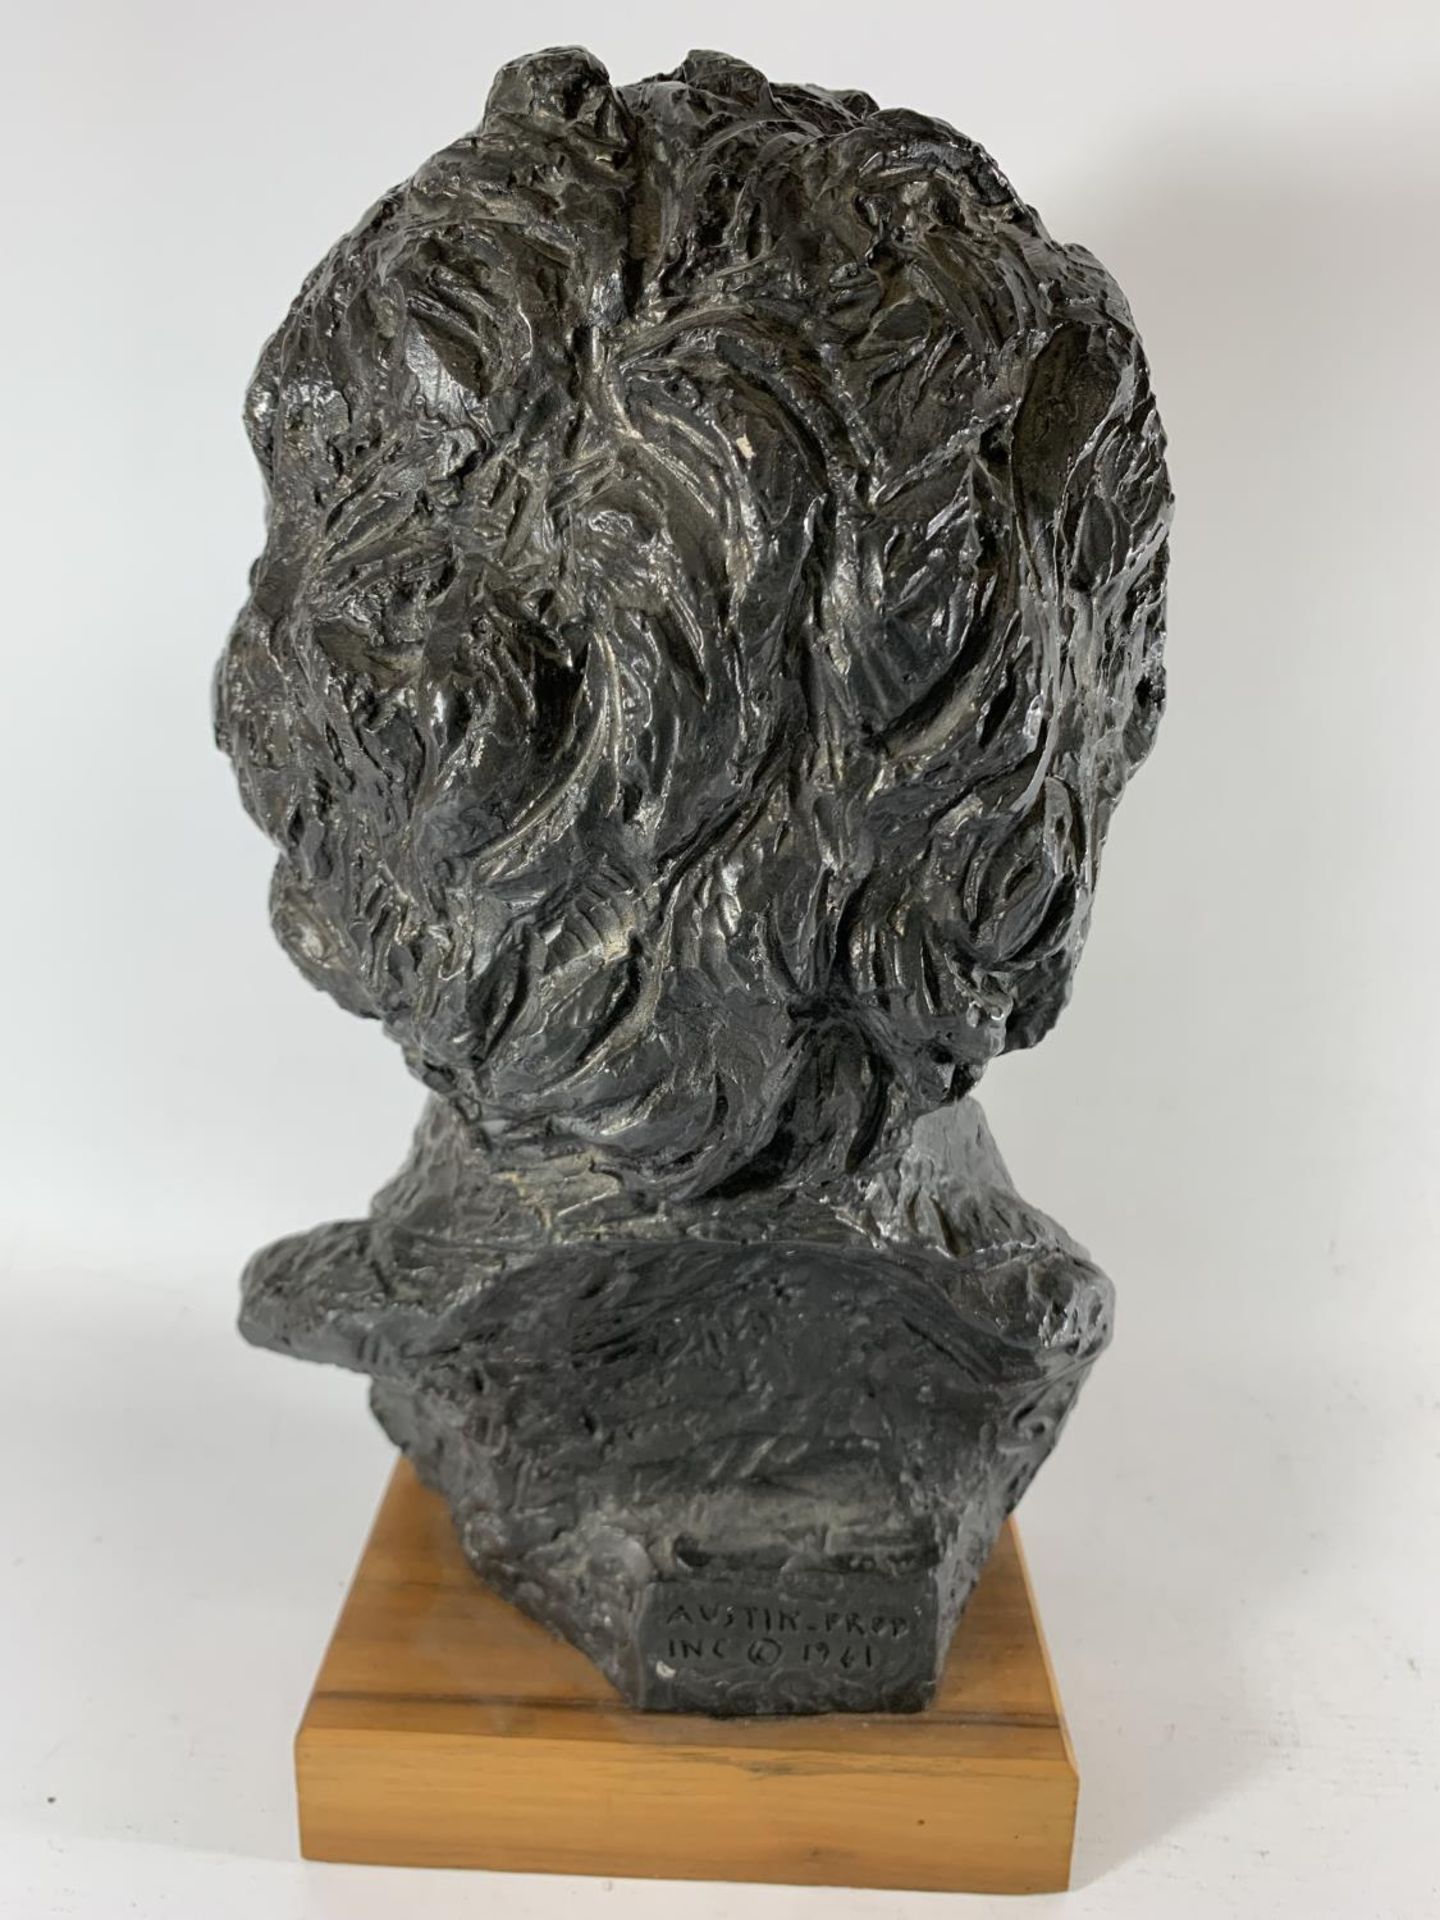 * A PRESENTATION PAINTED PLASTER BUST OF LUDWIG VAN BEETHOVEN, MOUNTED ON WOODEN BASE, HEIGHT 35. - Image 4 of 5